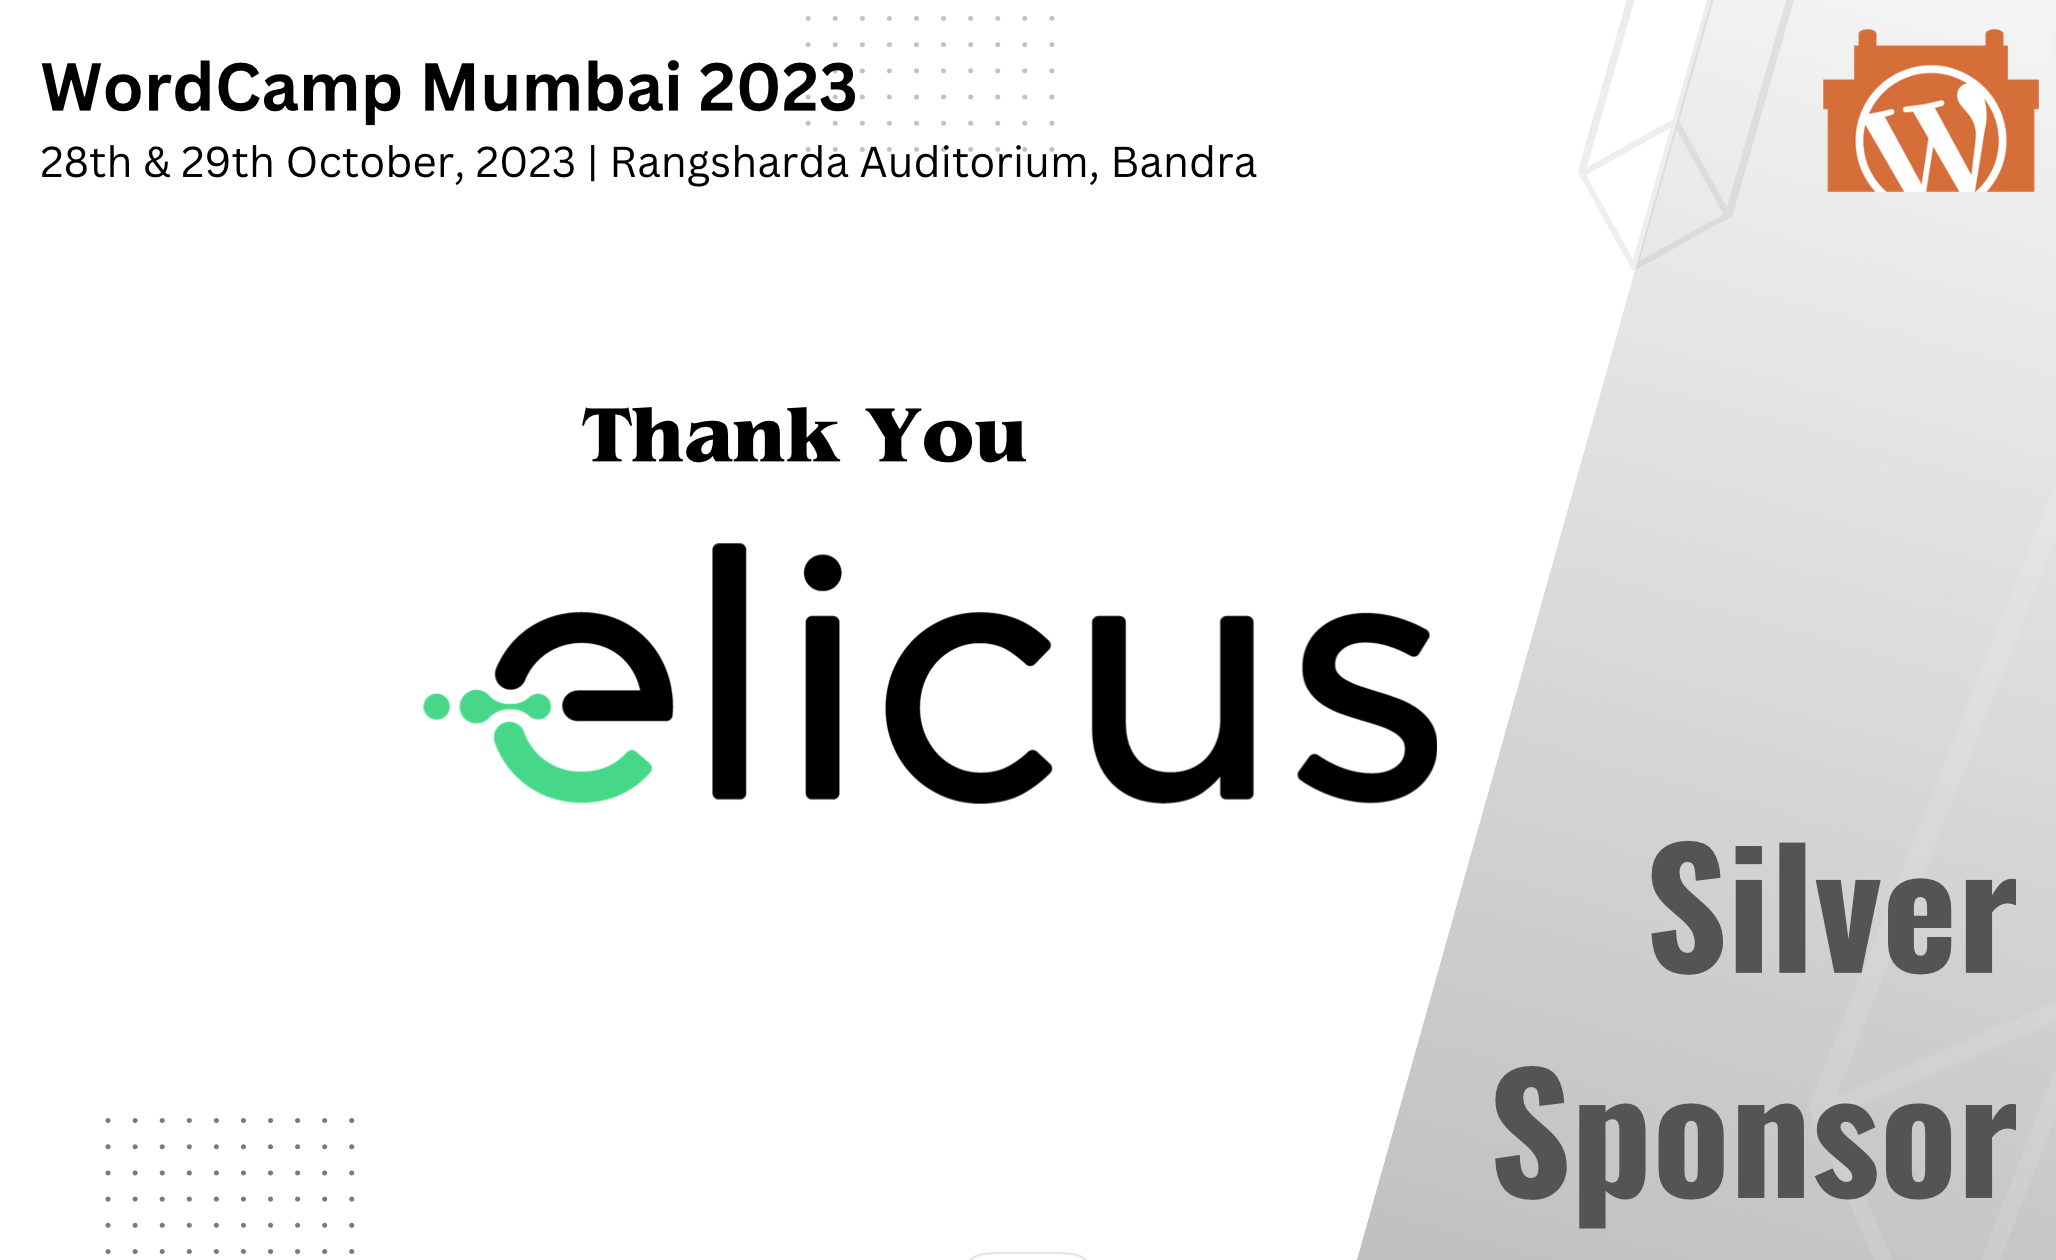 Thank You Elicus, for being our Silver Sponsor